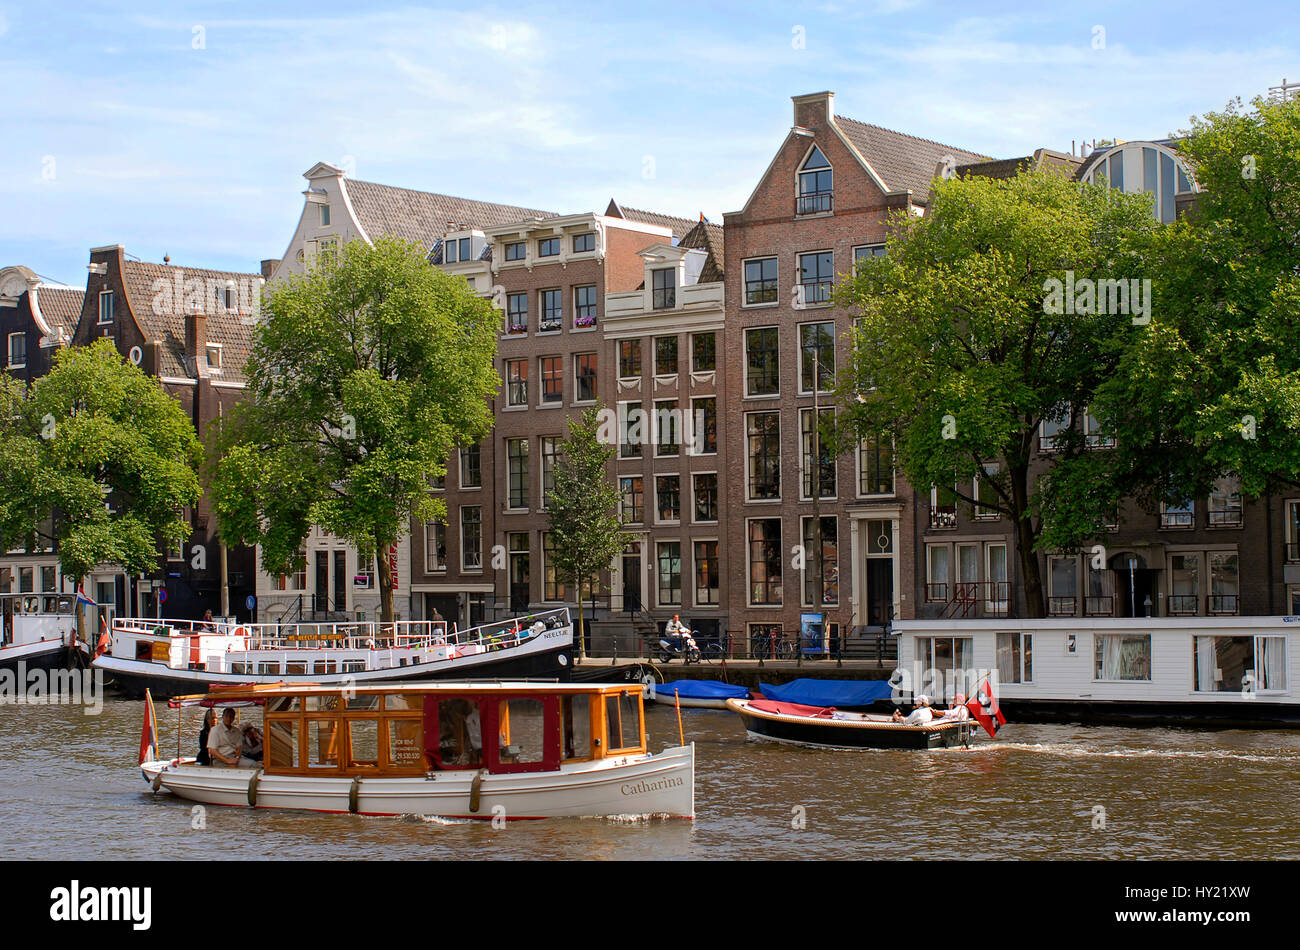 Image of small motor boats in a water channel in the inner city of Amsterdam, Holland. Stock Photo